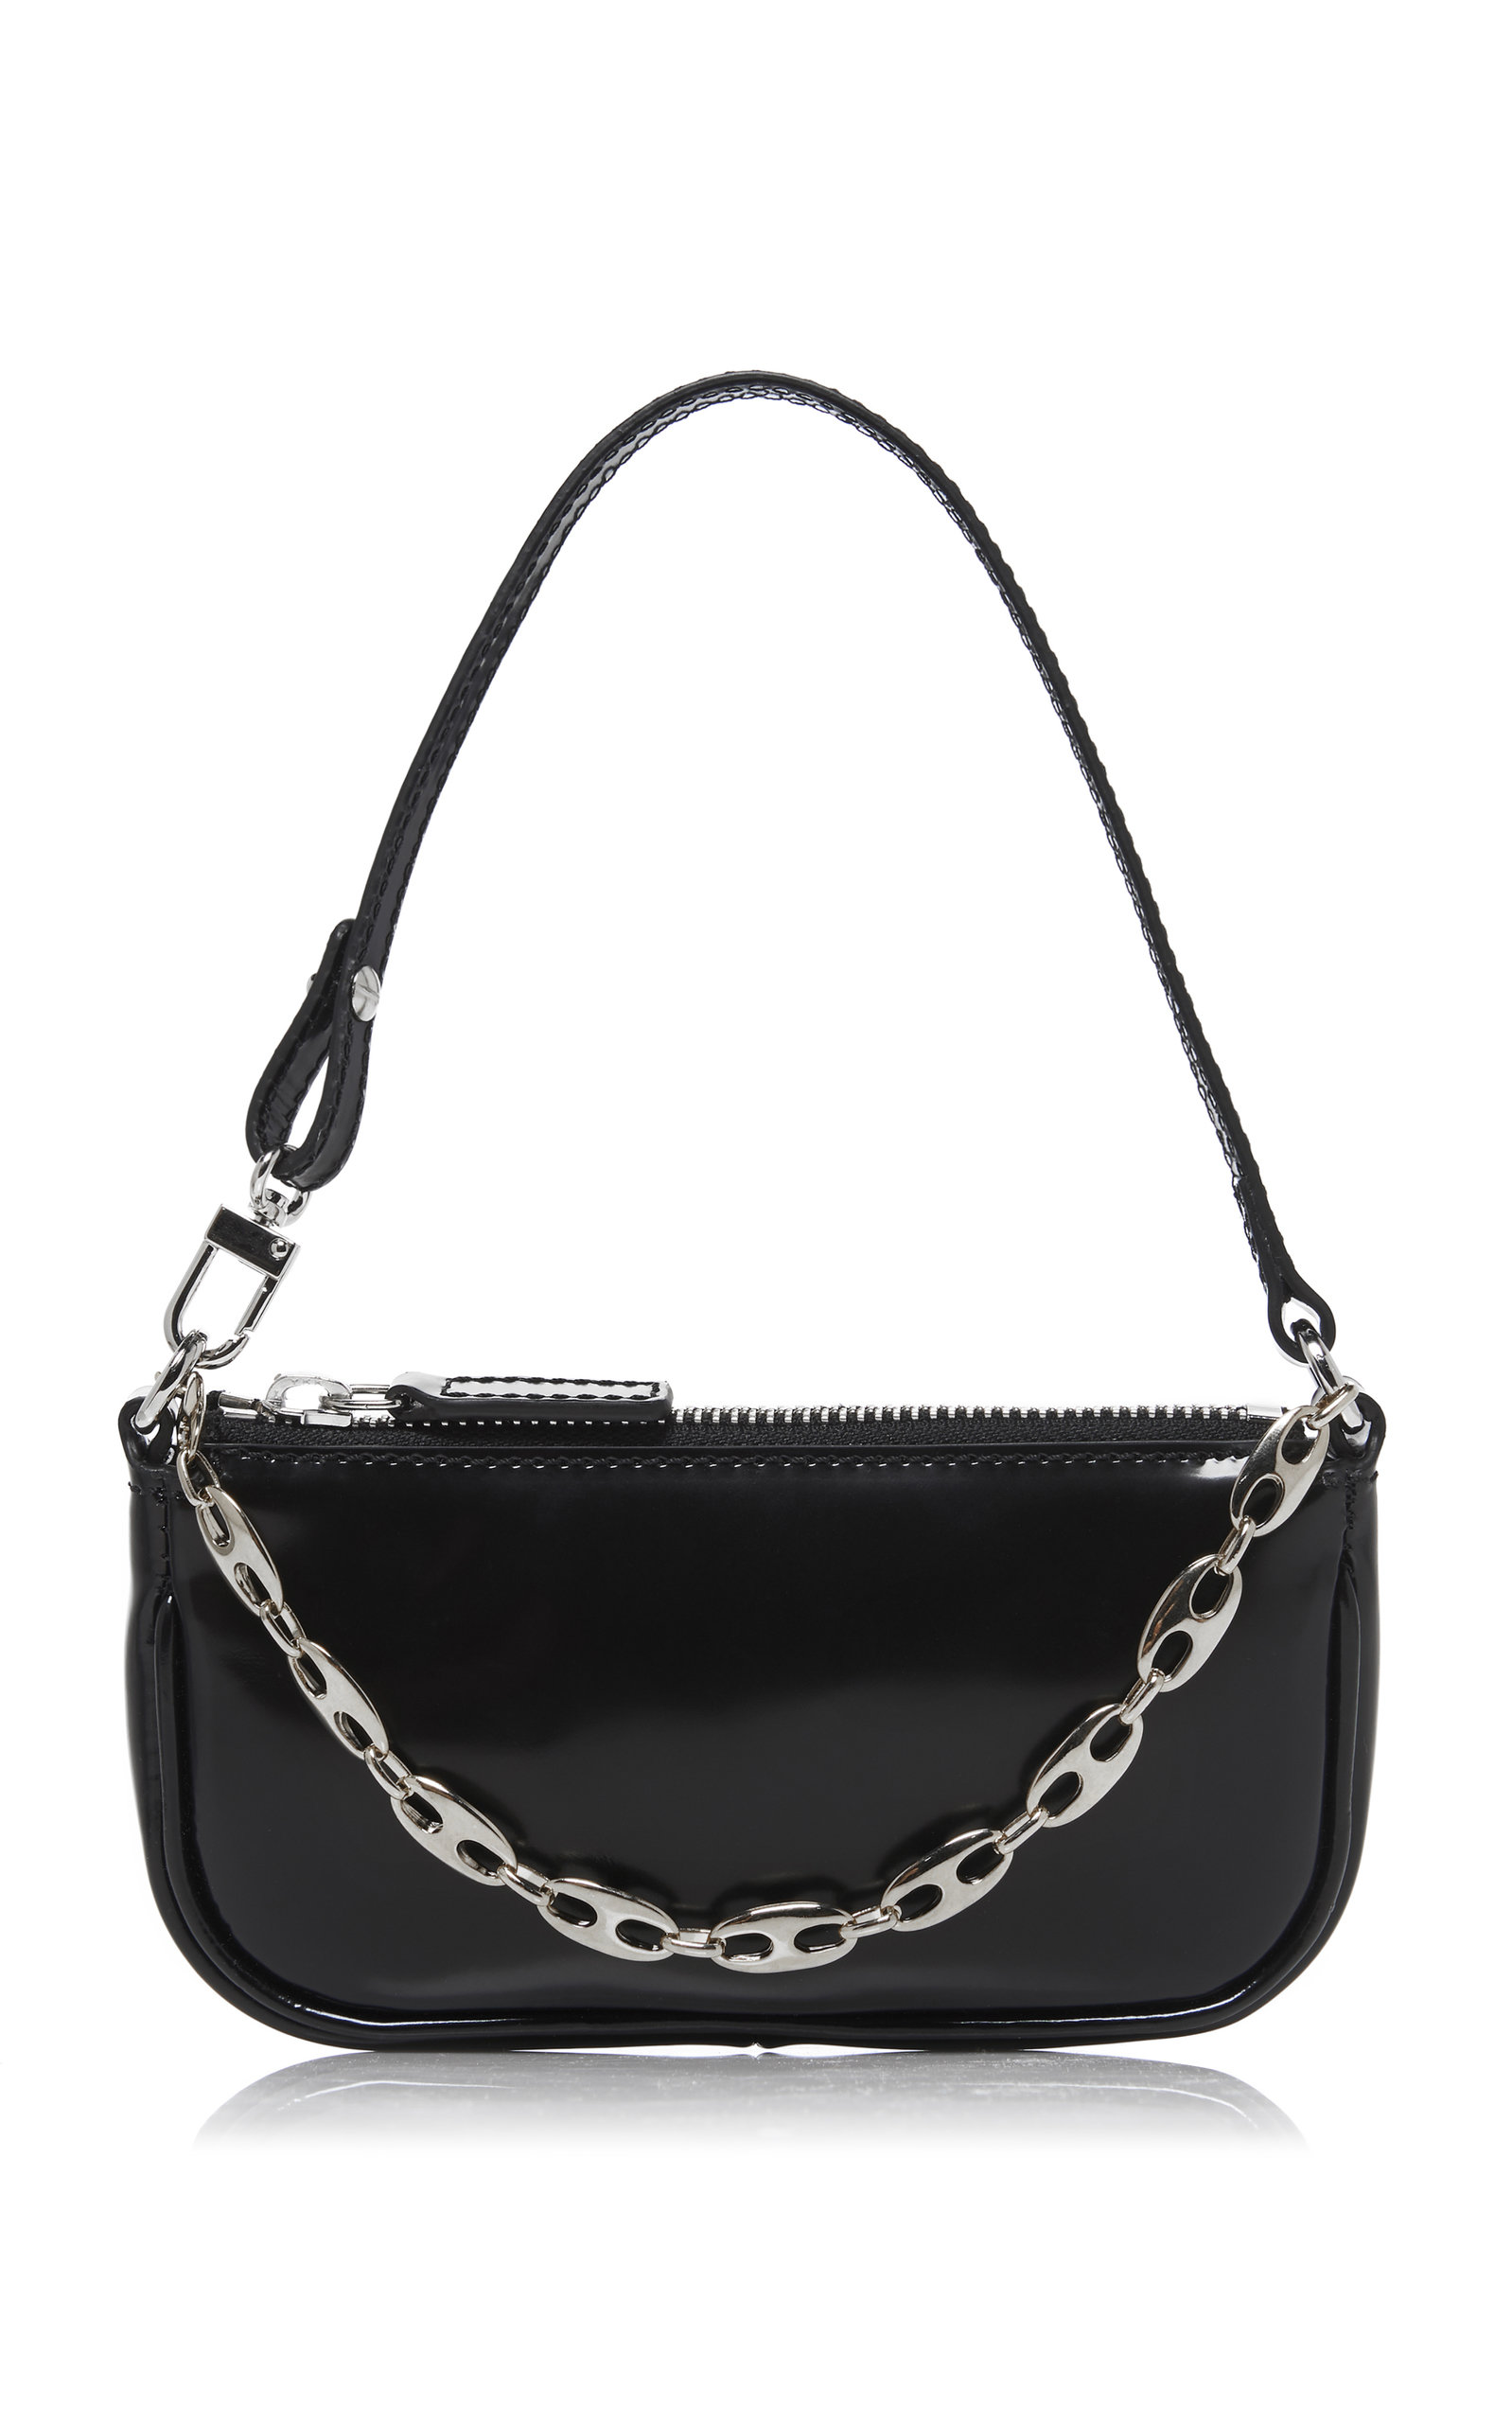 BY FARBY FAR Rachel Mini Patent Leather Shoulder Bag | DailyMail